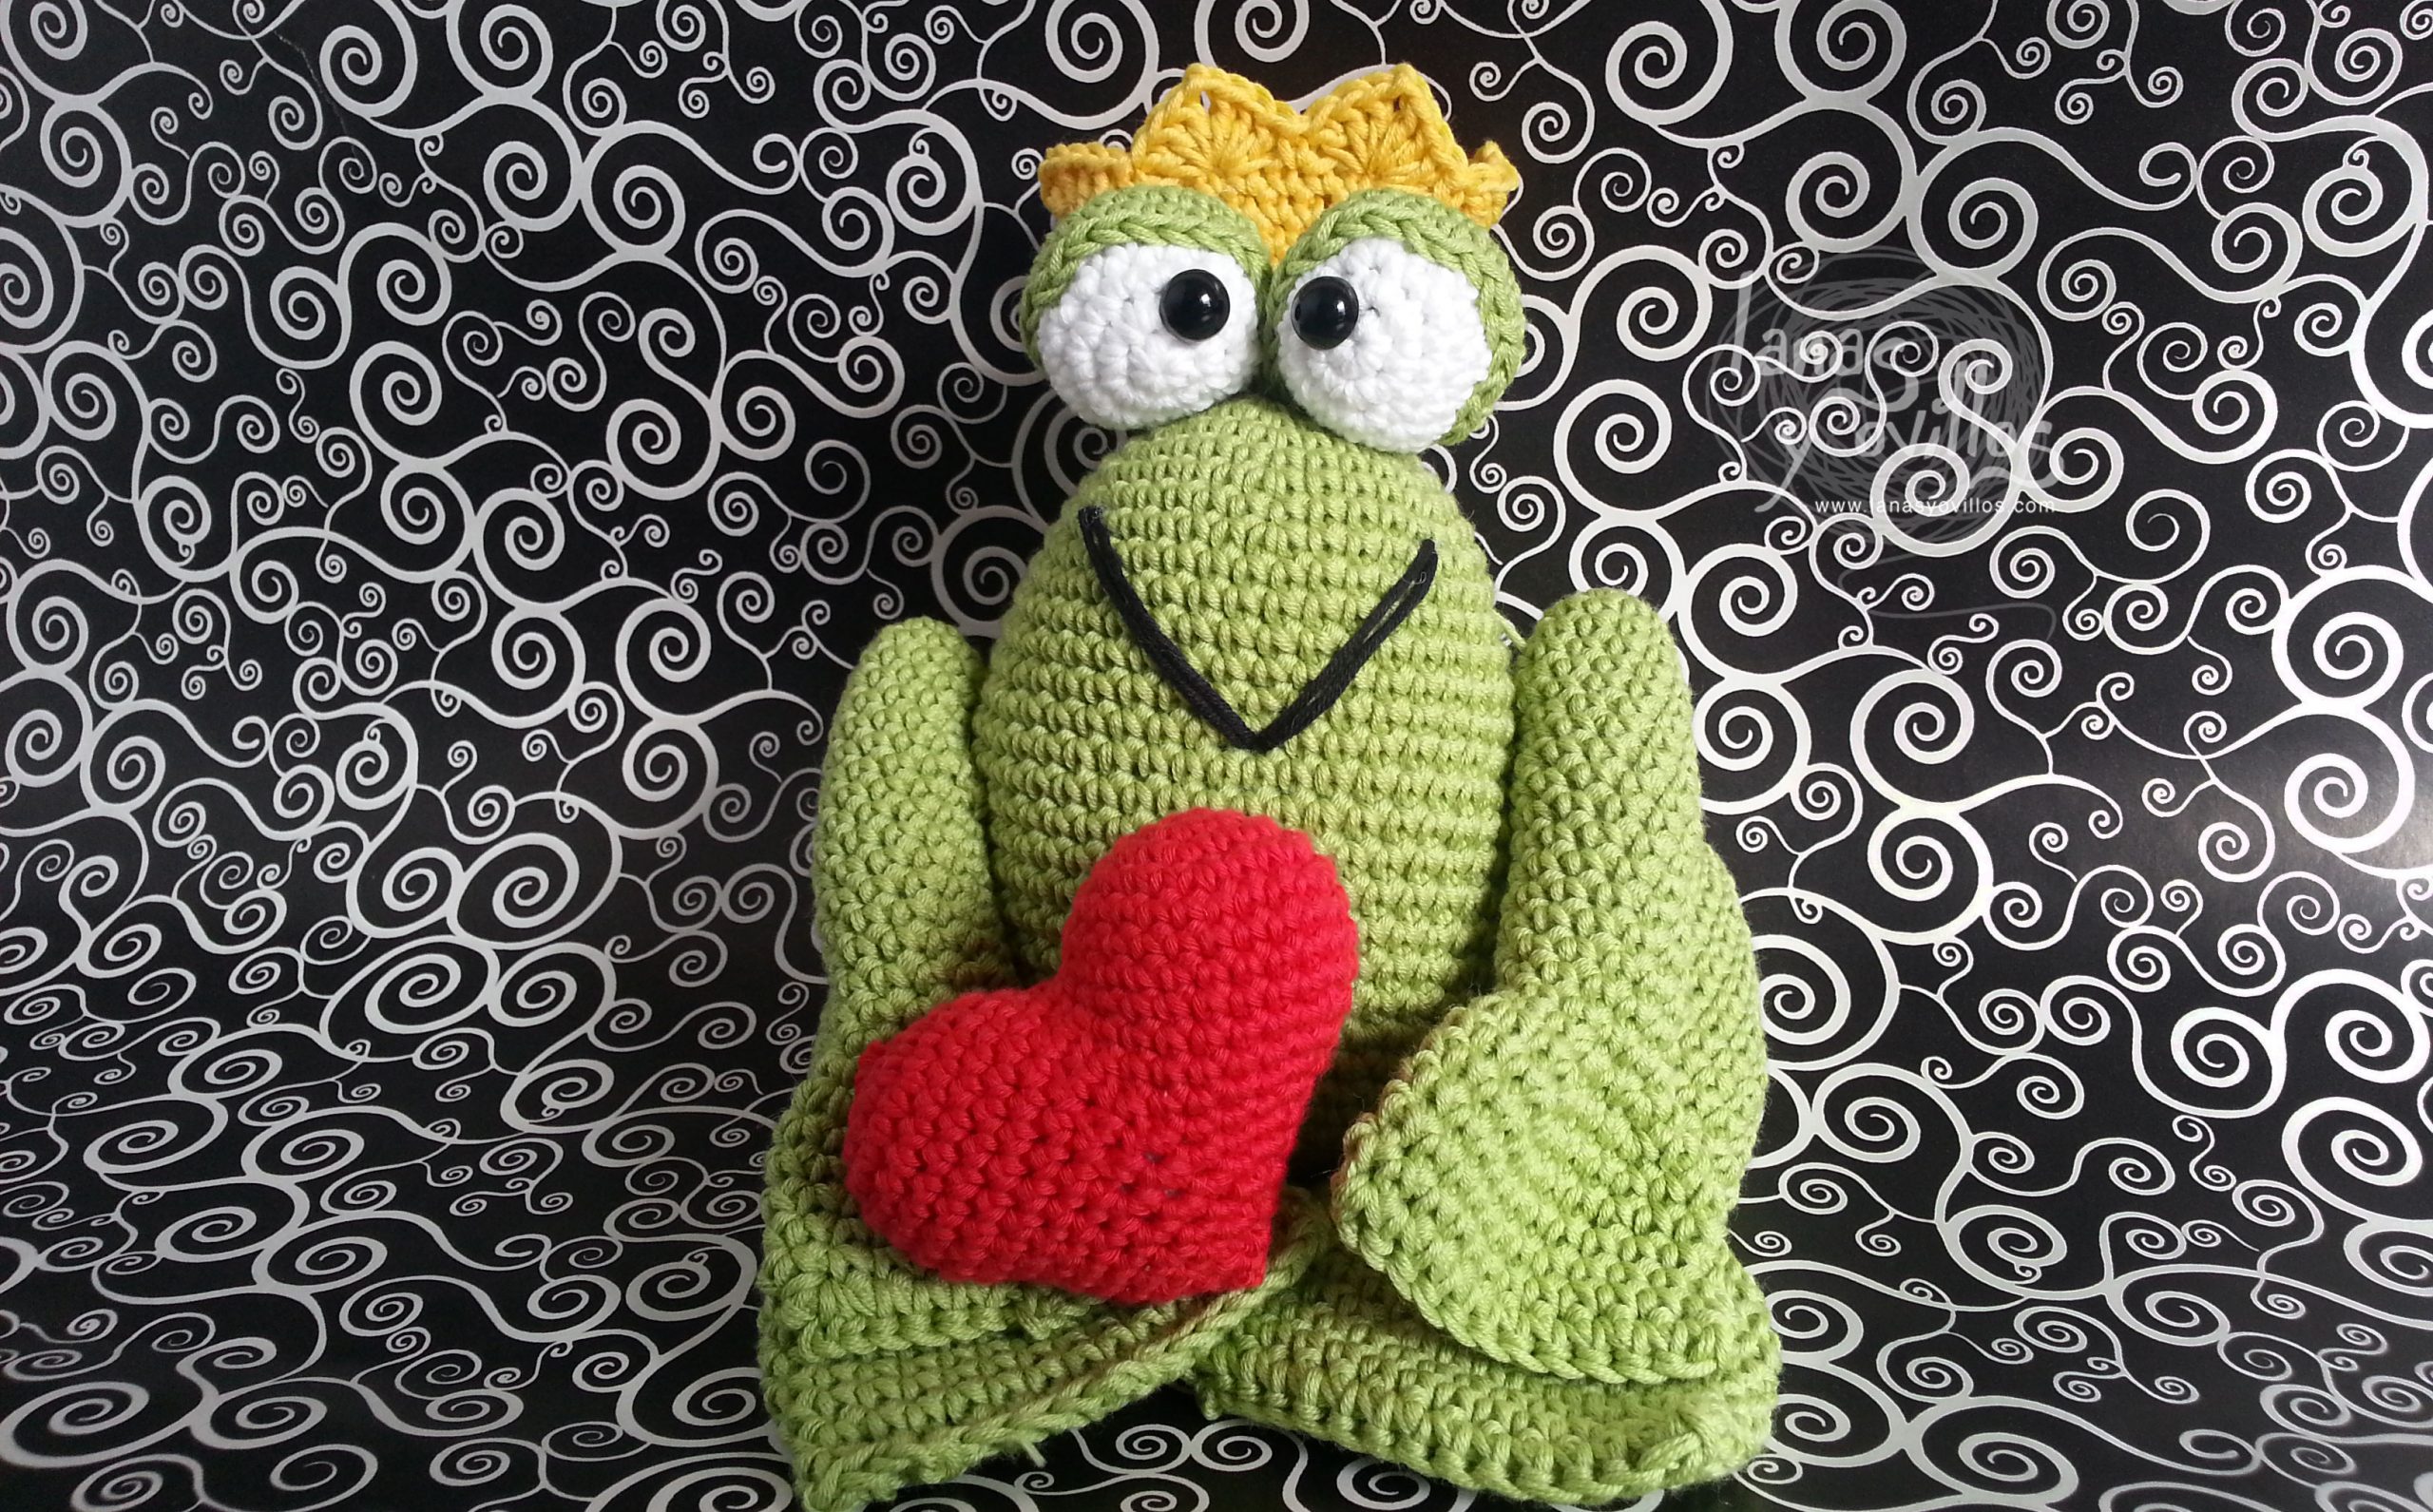 prince frog amigurumi free pattern with video tutorial step by step